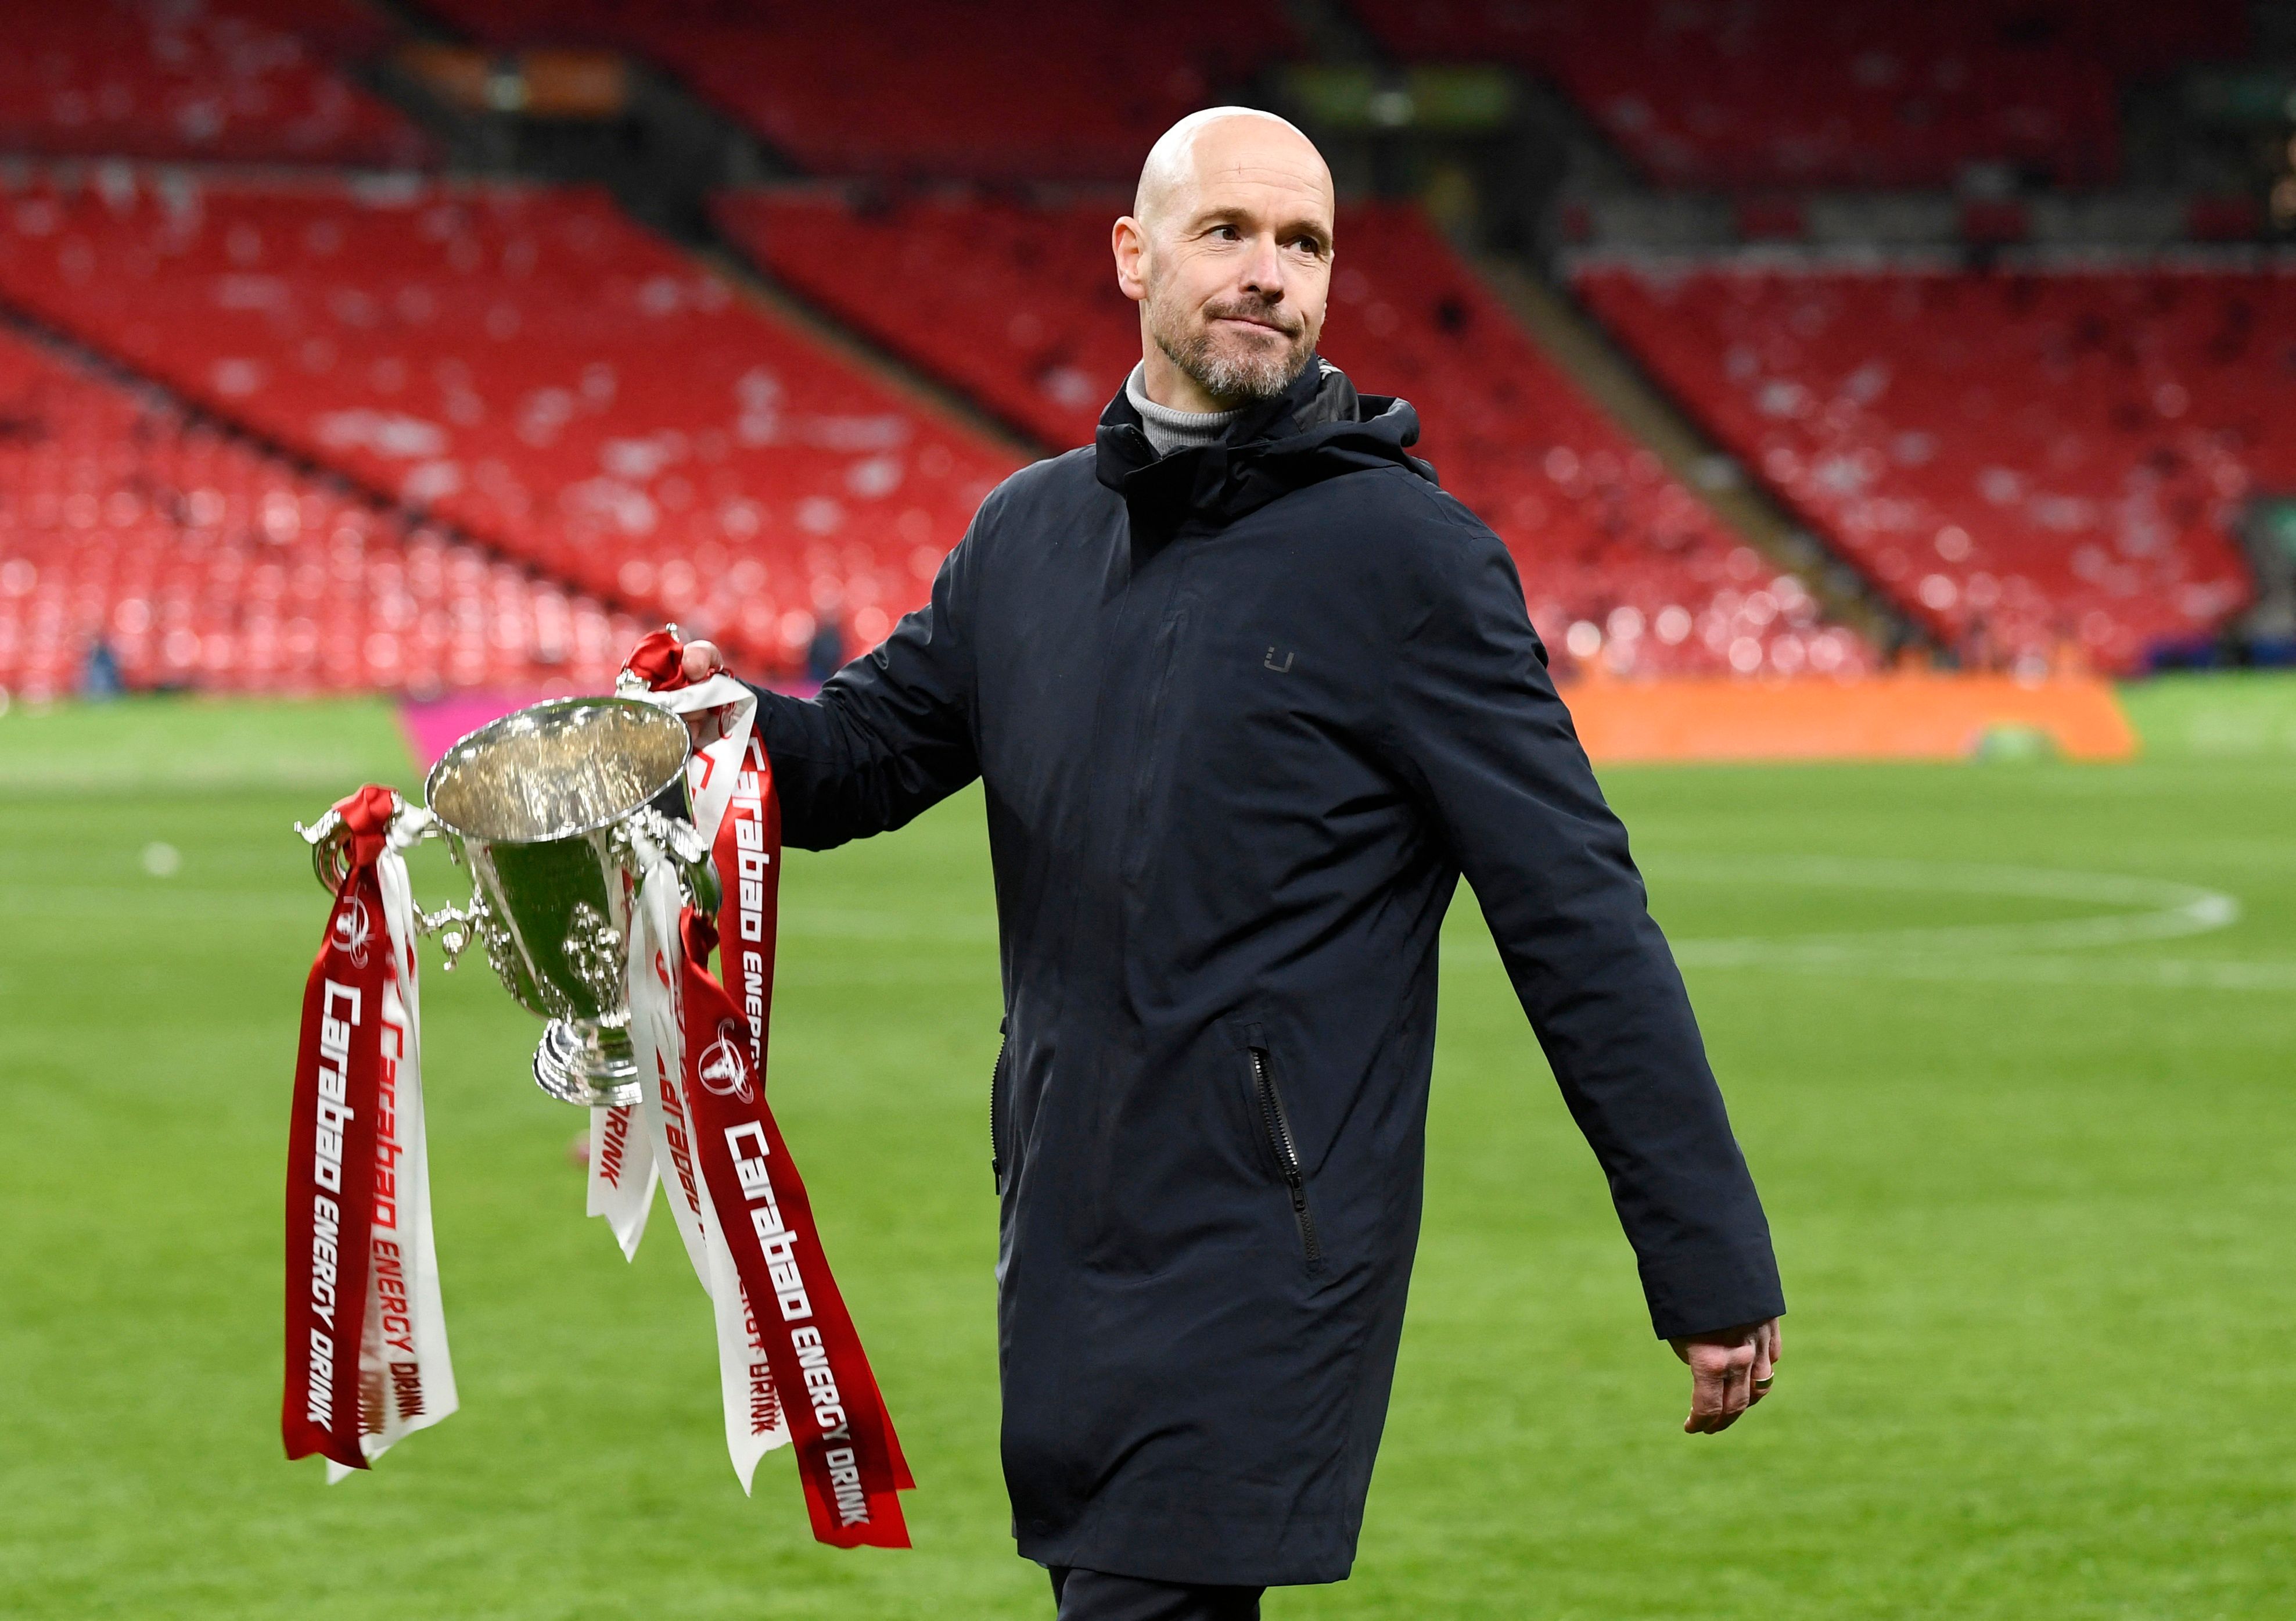 Manchester United manager Erik ten Hag carrying Carabao Cup